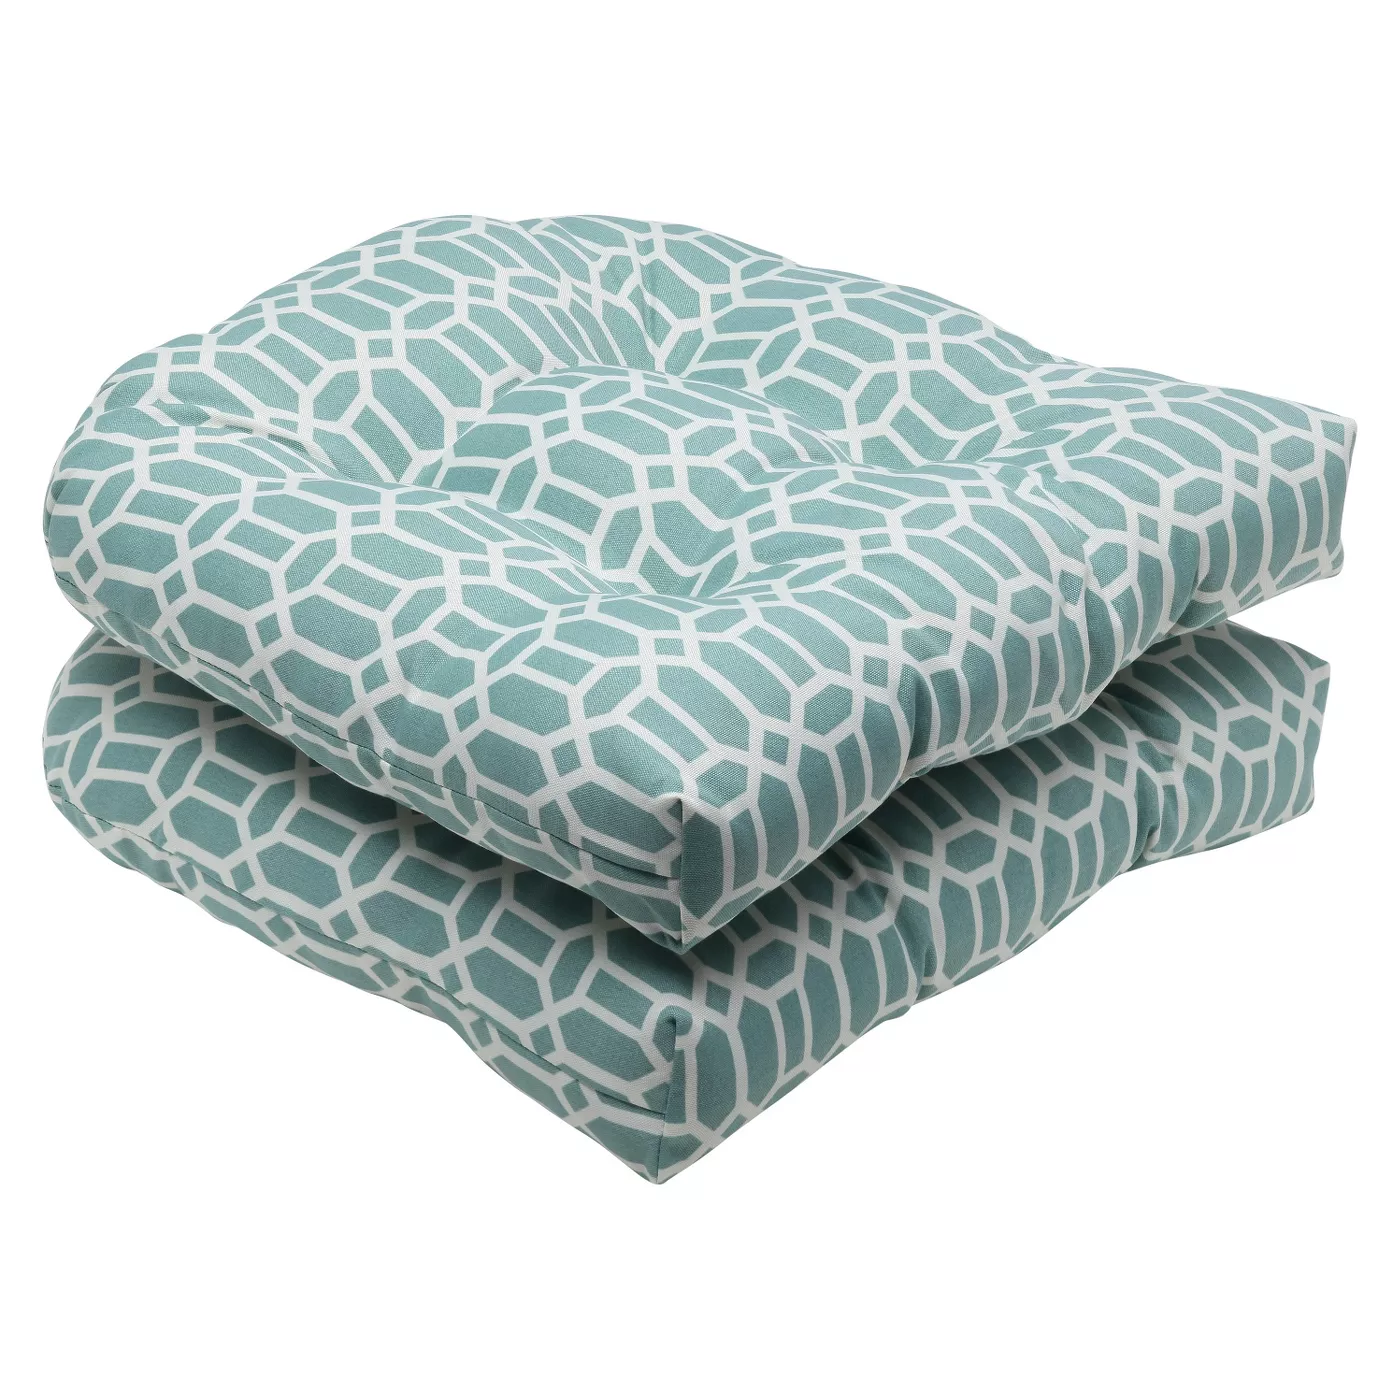 Pillow Perfect 2-Piece Outdoor Wicker Seat Cushions - Rhodes - image 1 of 1